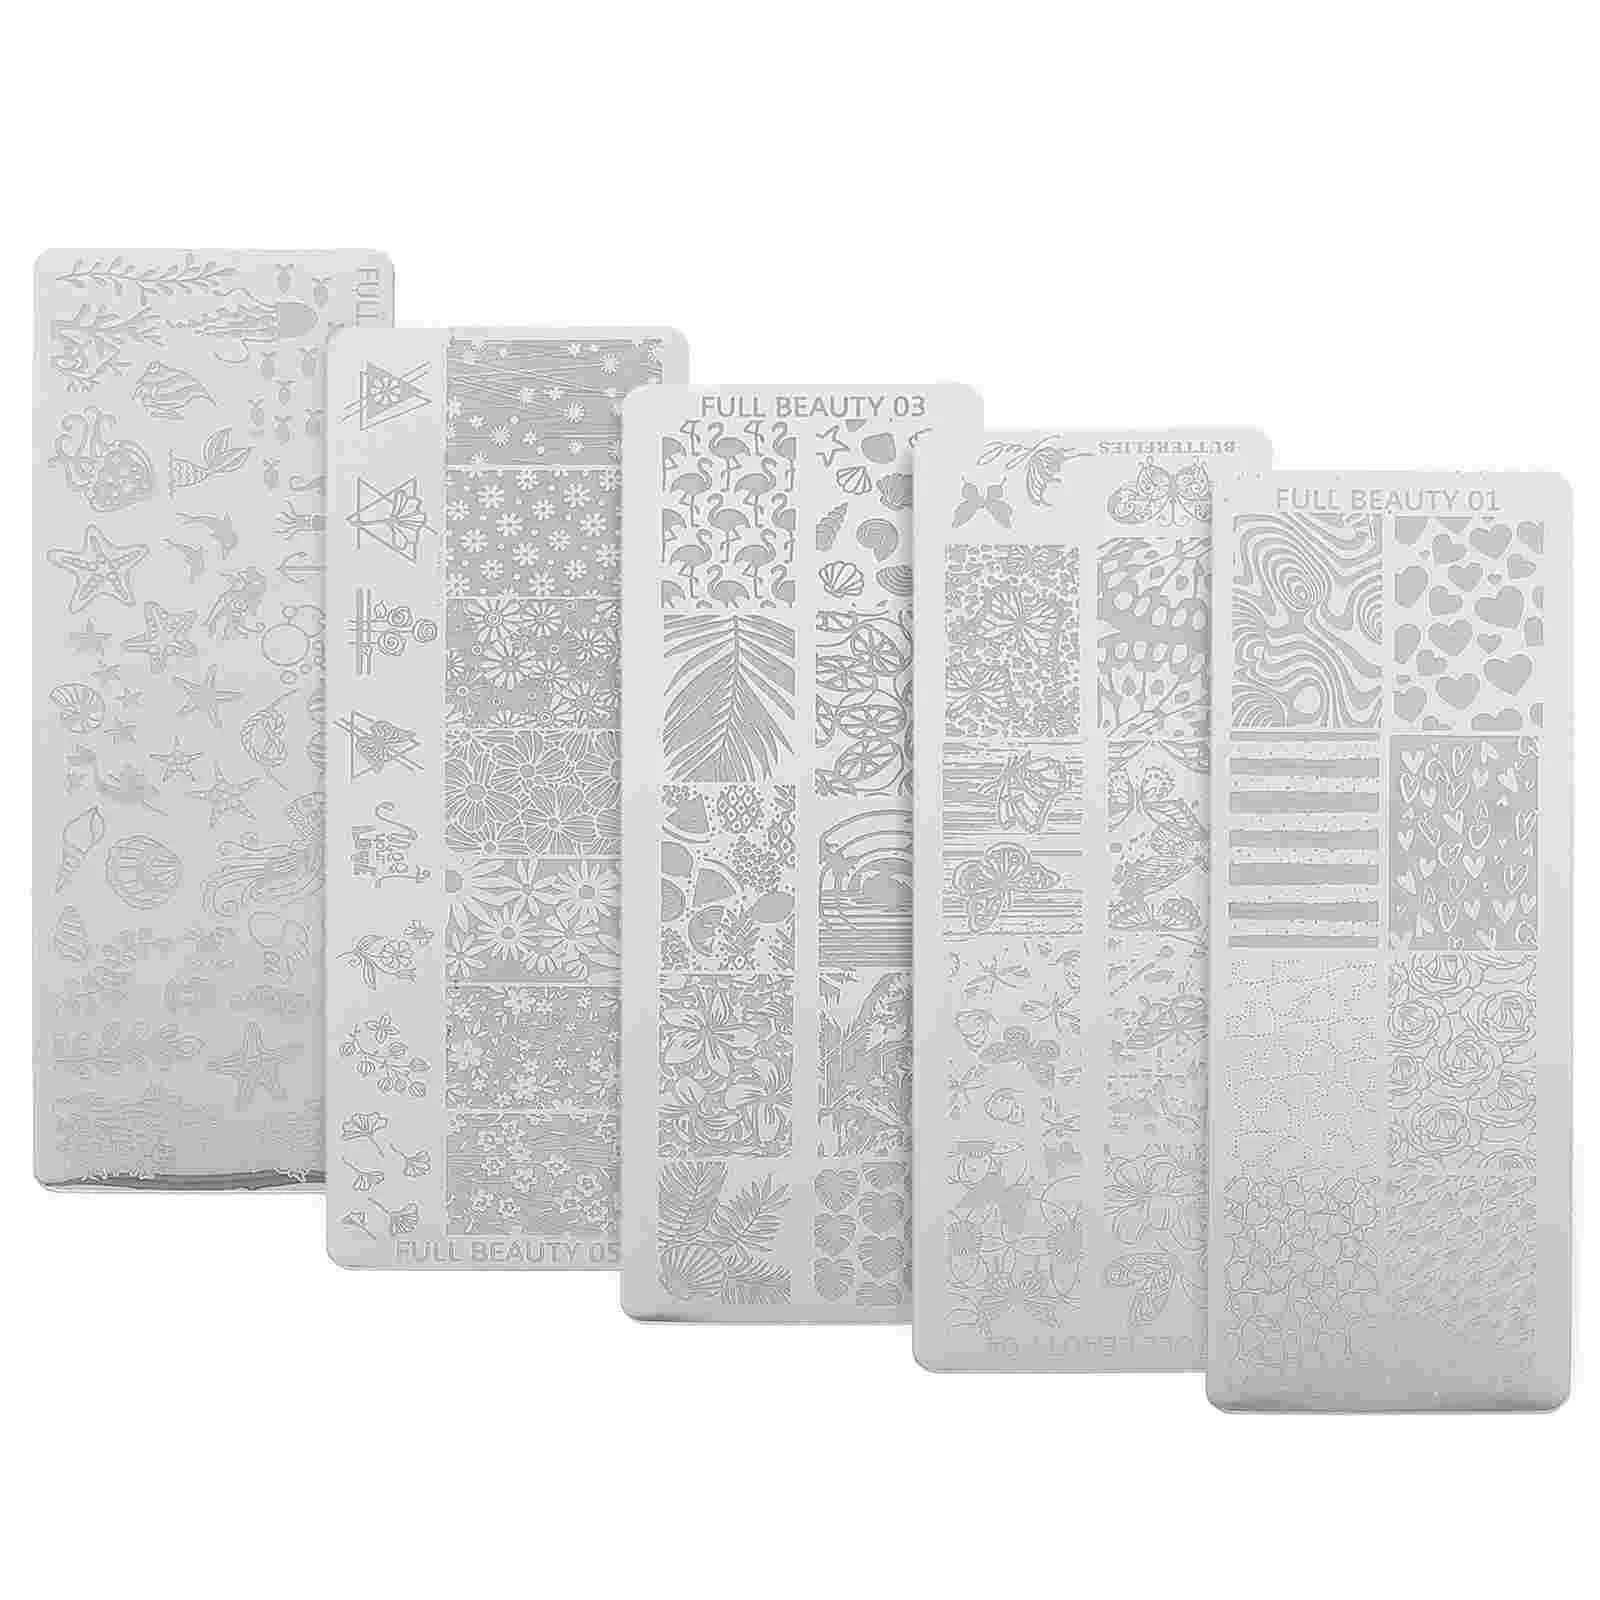 

5 Pcs Nail Transfer Printing Plate Stamper Unique Templates Creative Stamping Die Stainless Steel Manicure Stencils Images